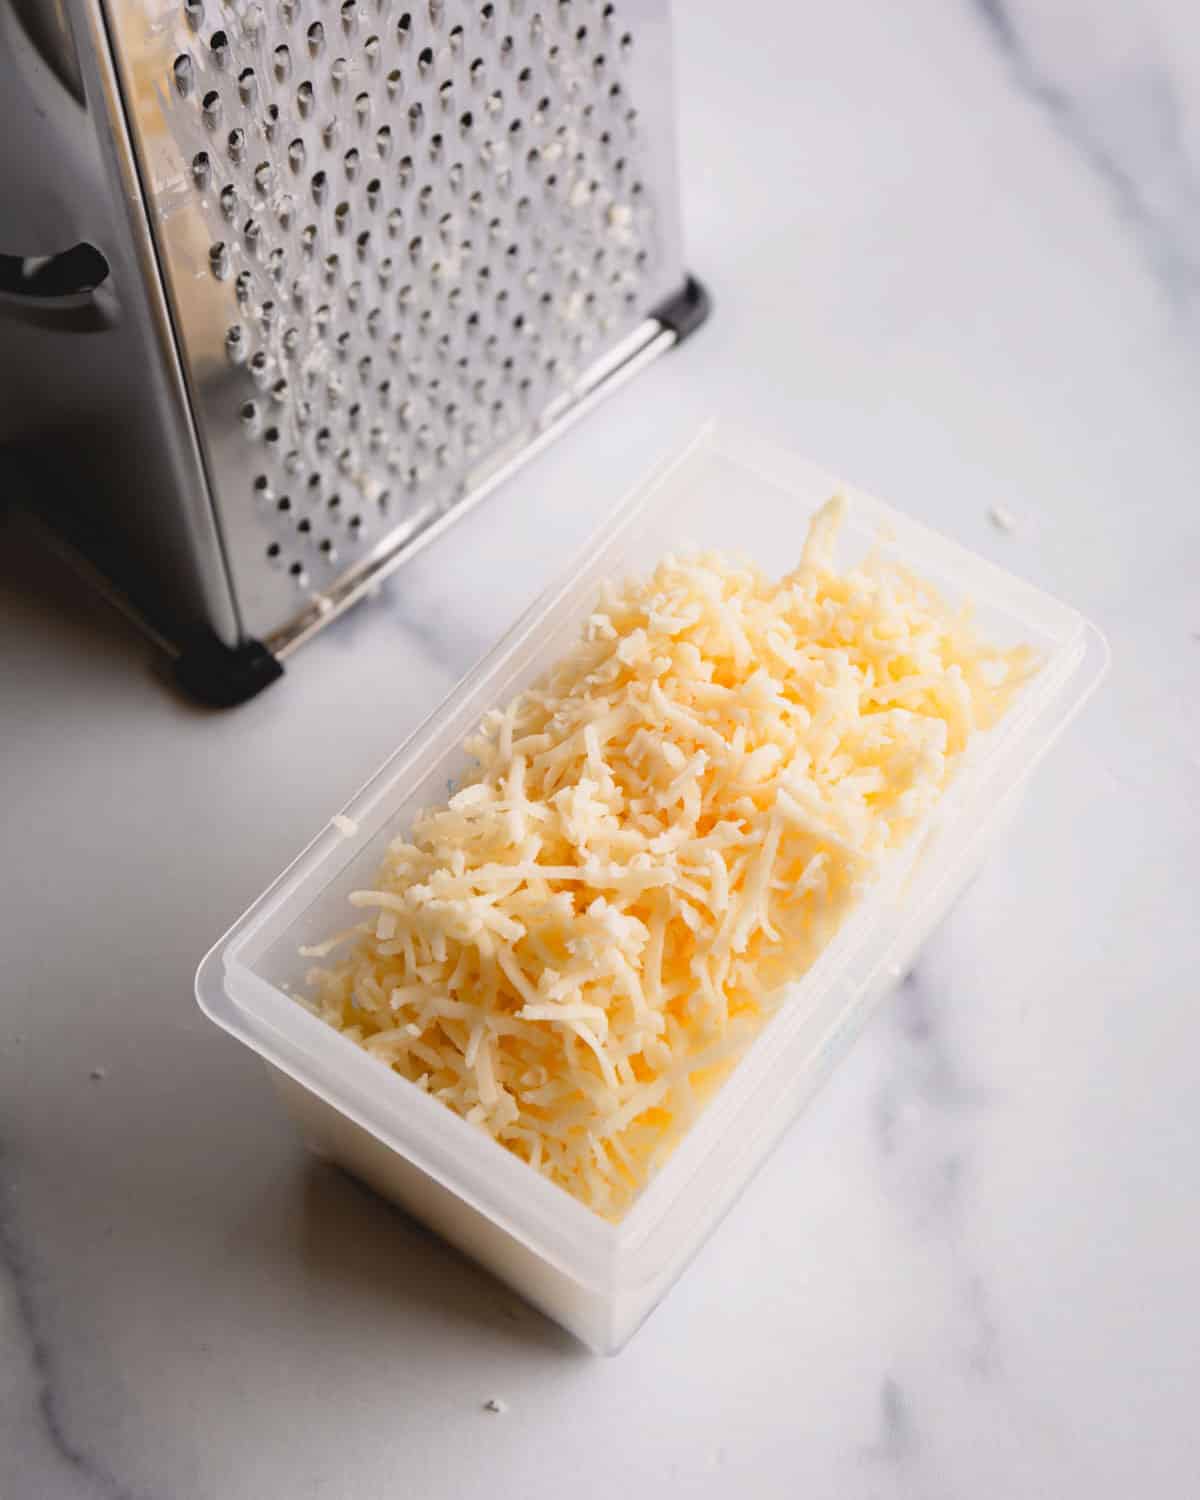 Freshly grated aged havarti cheese on a fine grater.